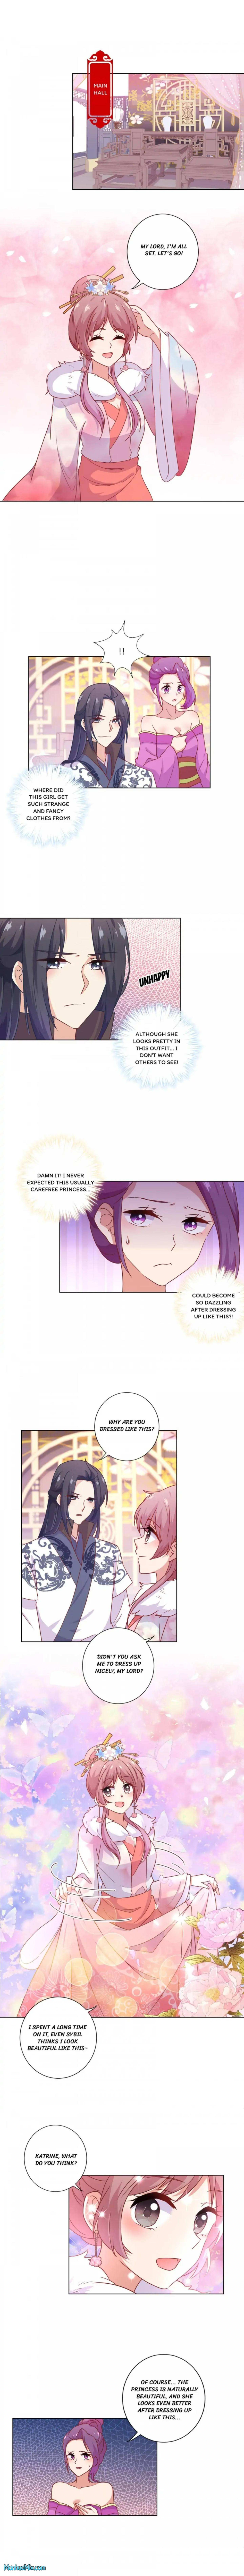 Prince Cultivation Project - Page 1